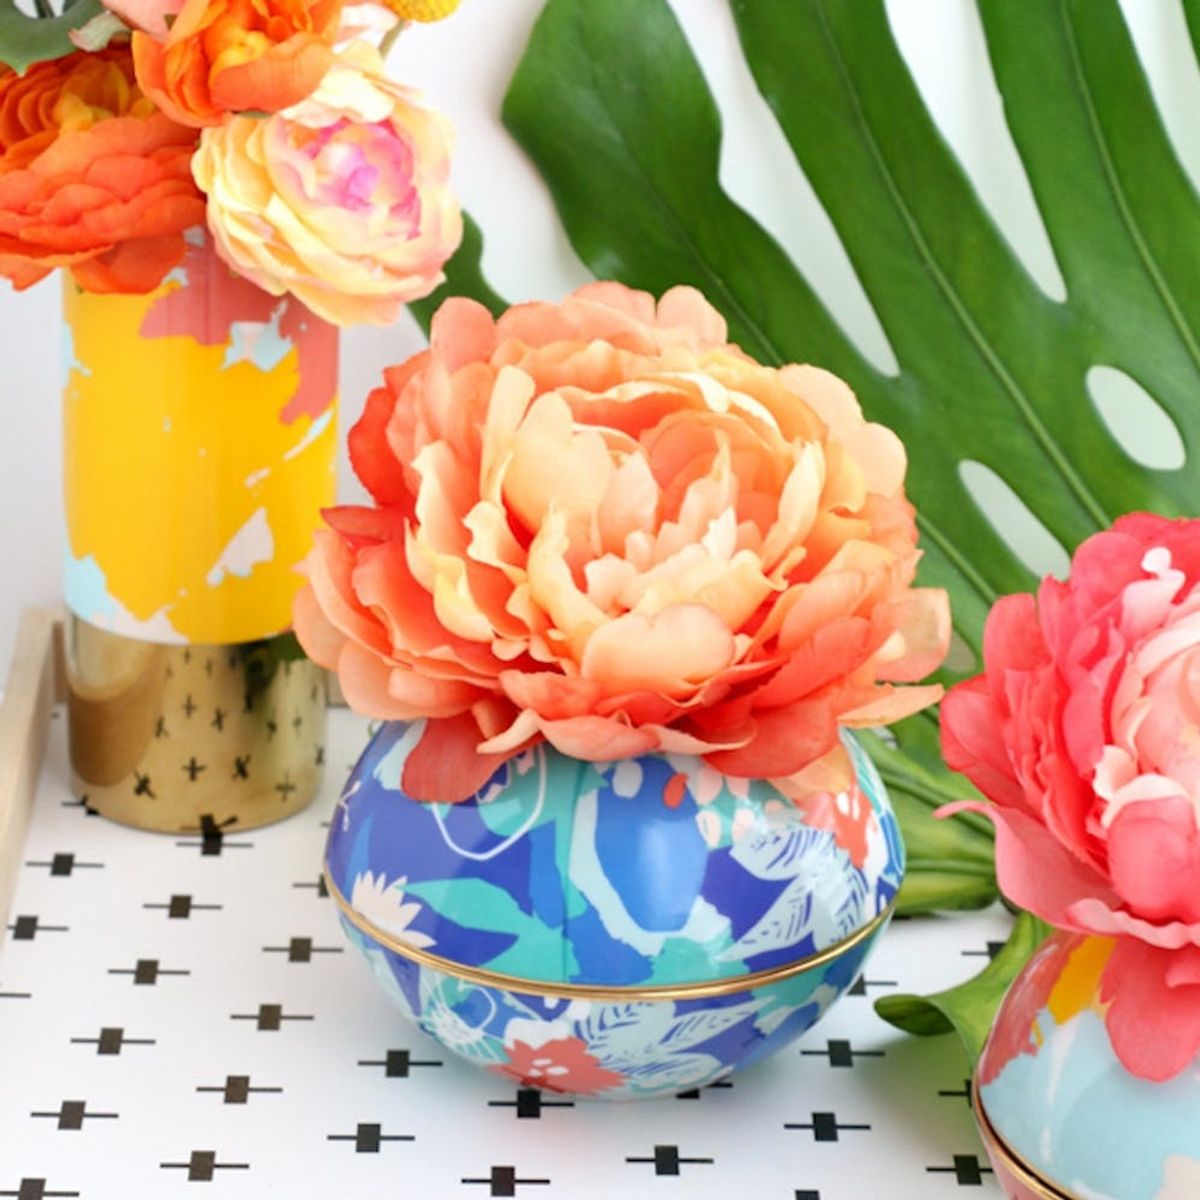 What to Make This Weekend: Patterned Orb Vases, Hanging Leather Planters + More